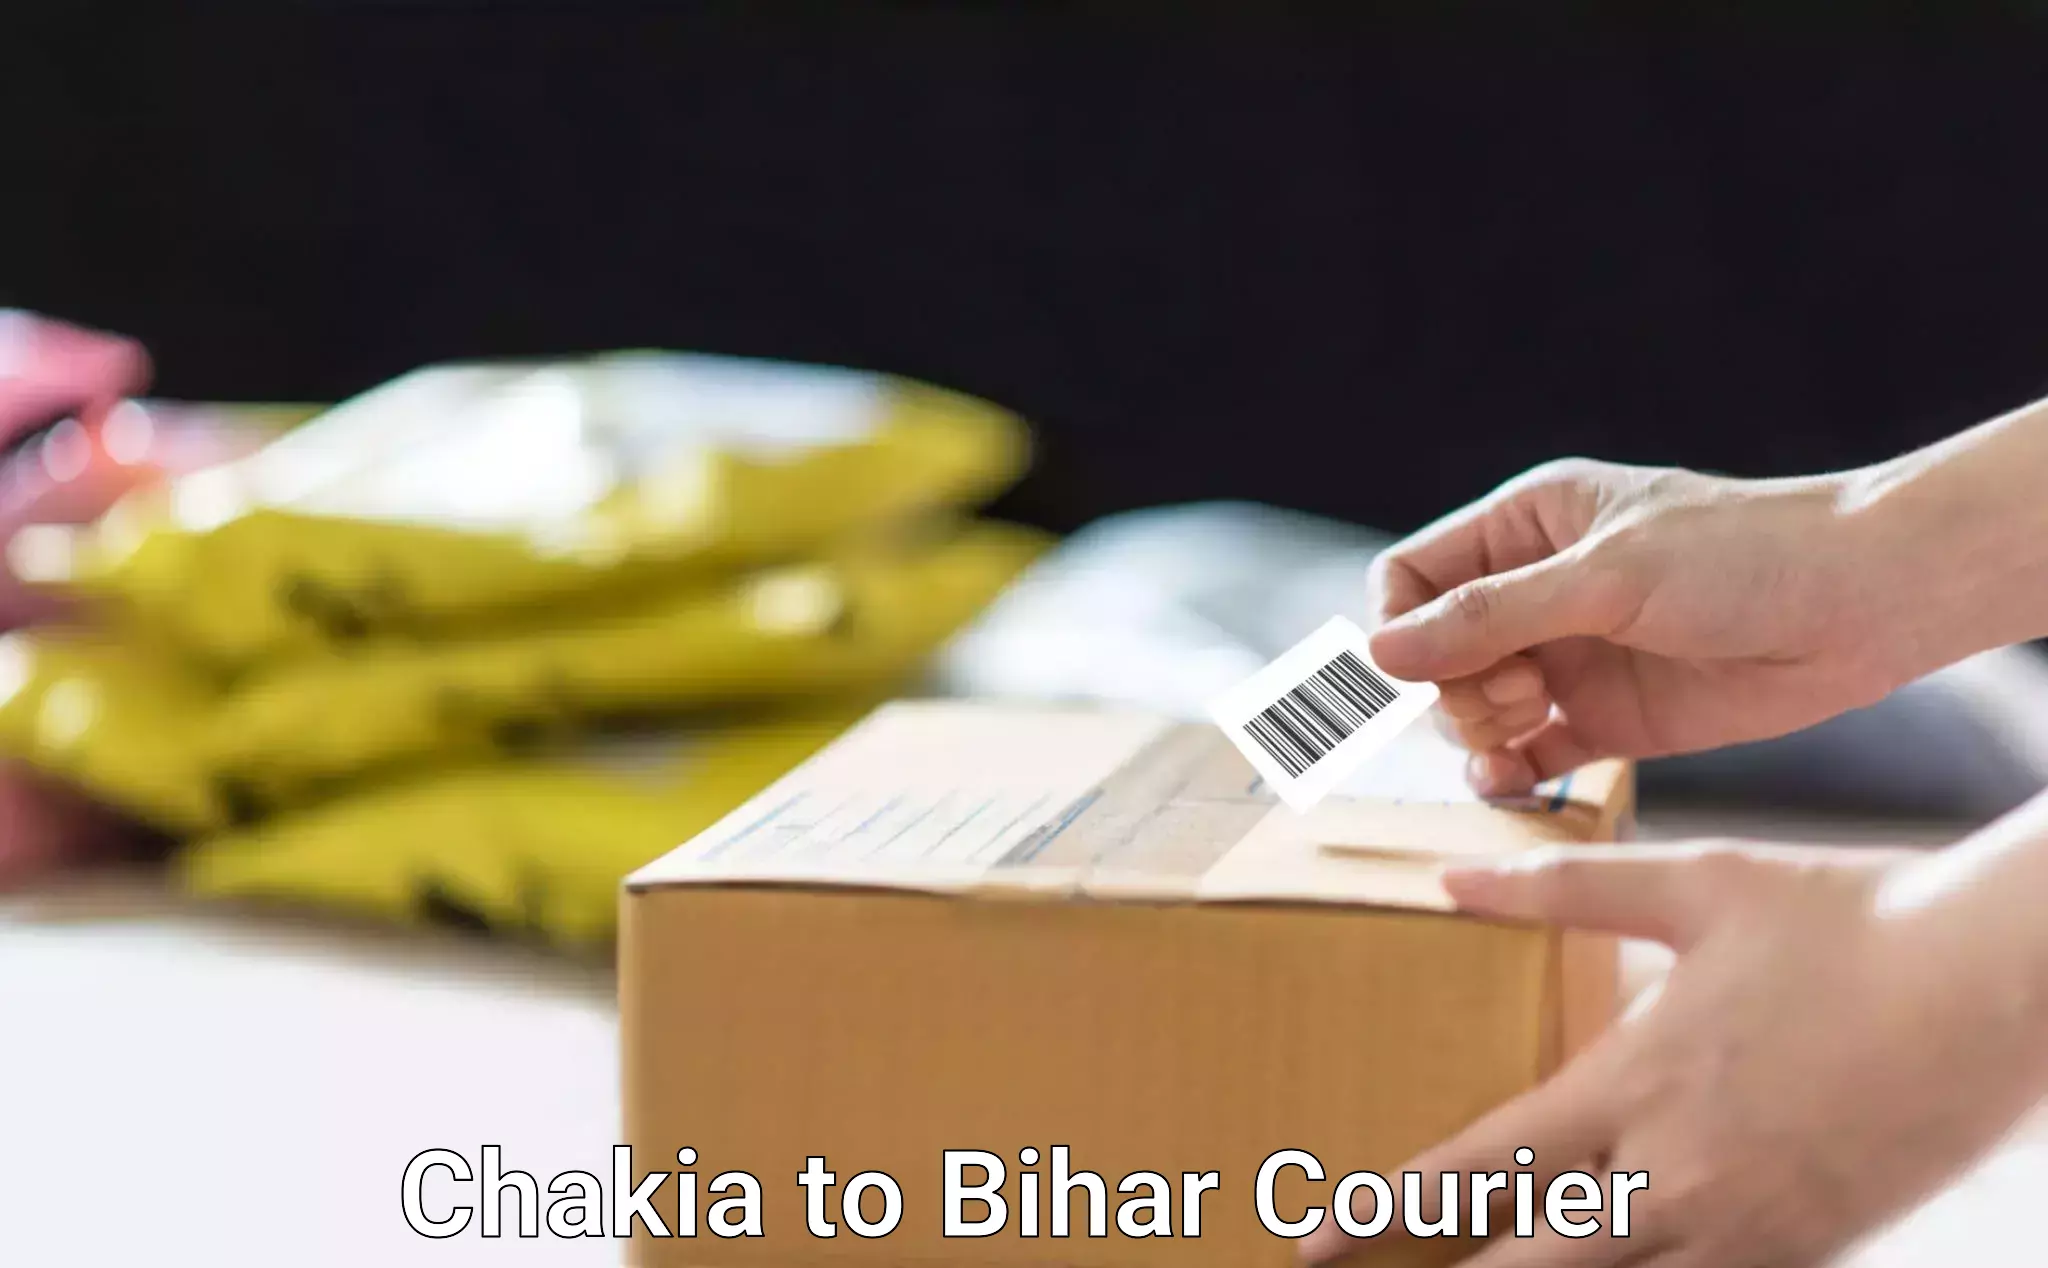 Affordable relocation services Chakia to Bihar